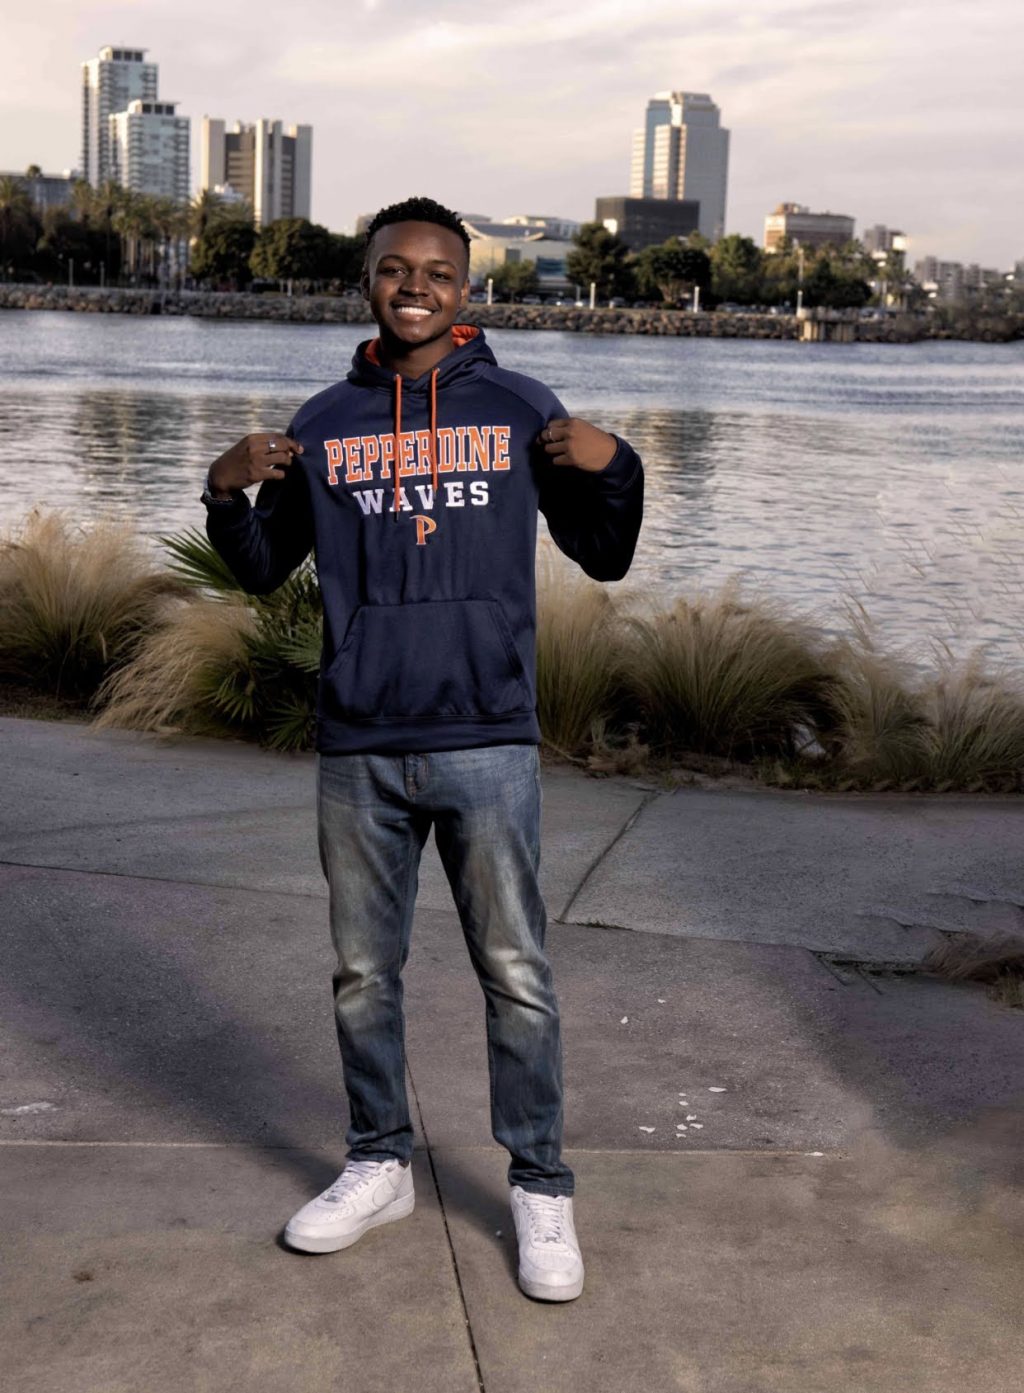 Wicks takes pictures for graduation in Long Beach, Calif., in July. He said seeing how serious Pepperdine was about community and the Christian affiliation were the two biggest contributors to his decision to rank Pepperdine as his first choice.